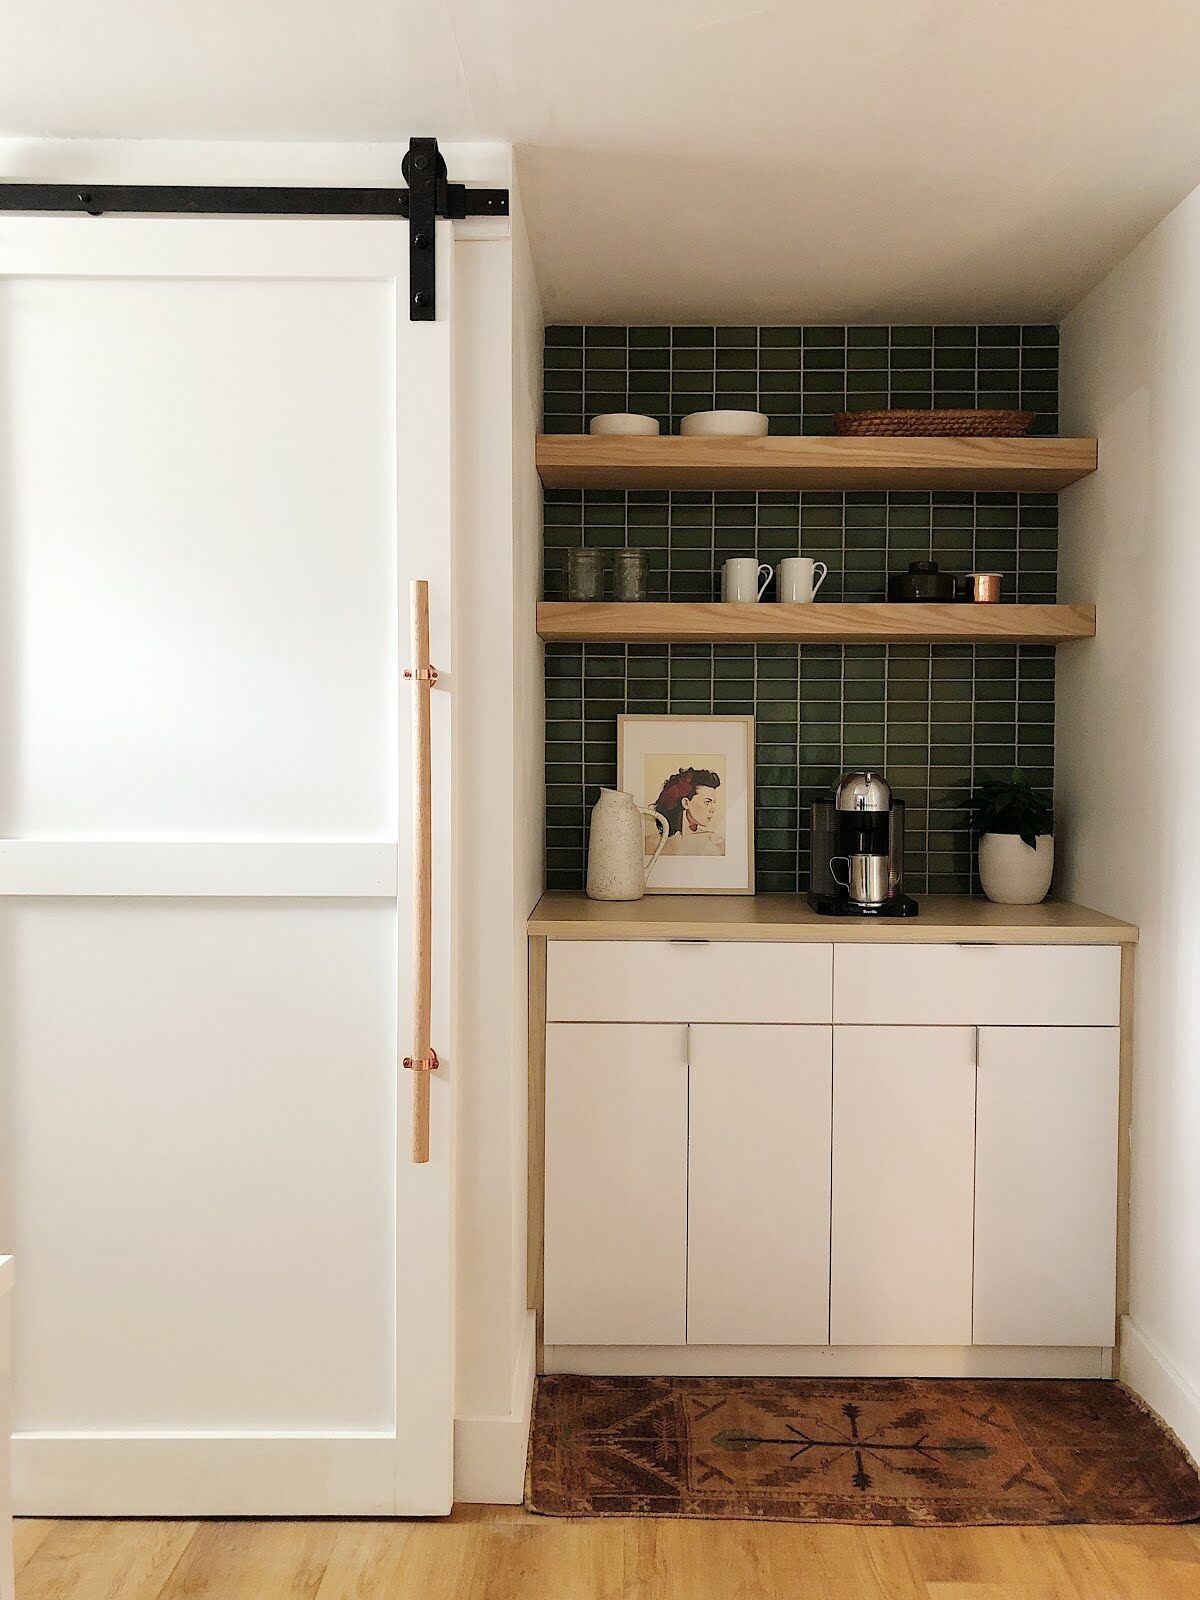 A simple coffee bar in the kitchen with extra storage using floating shelves